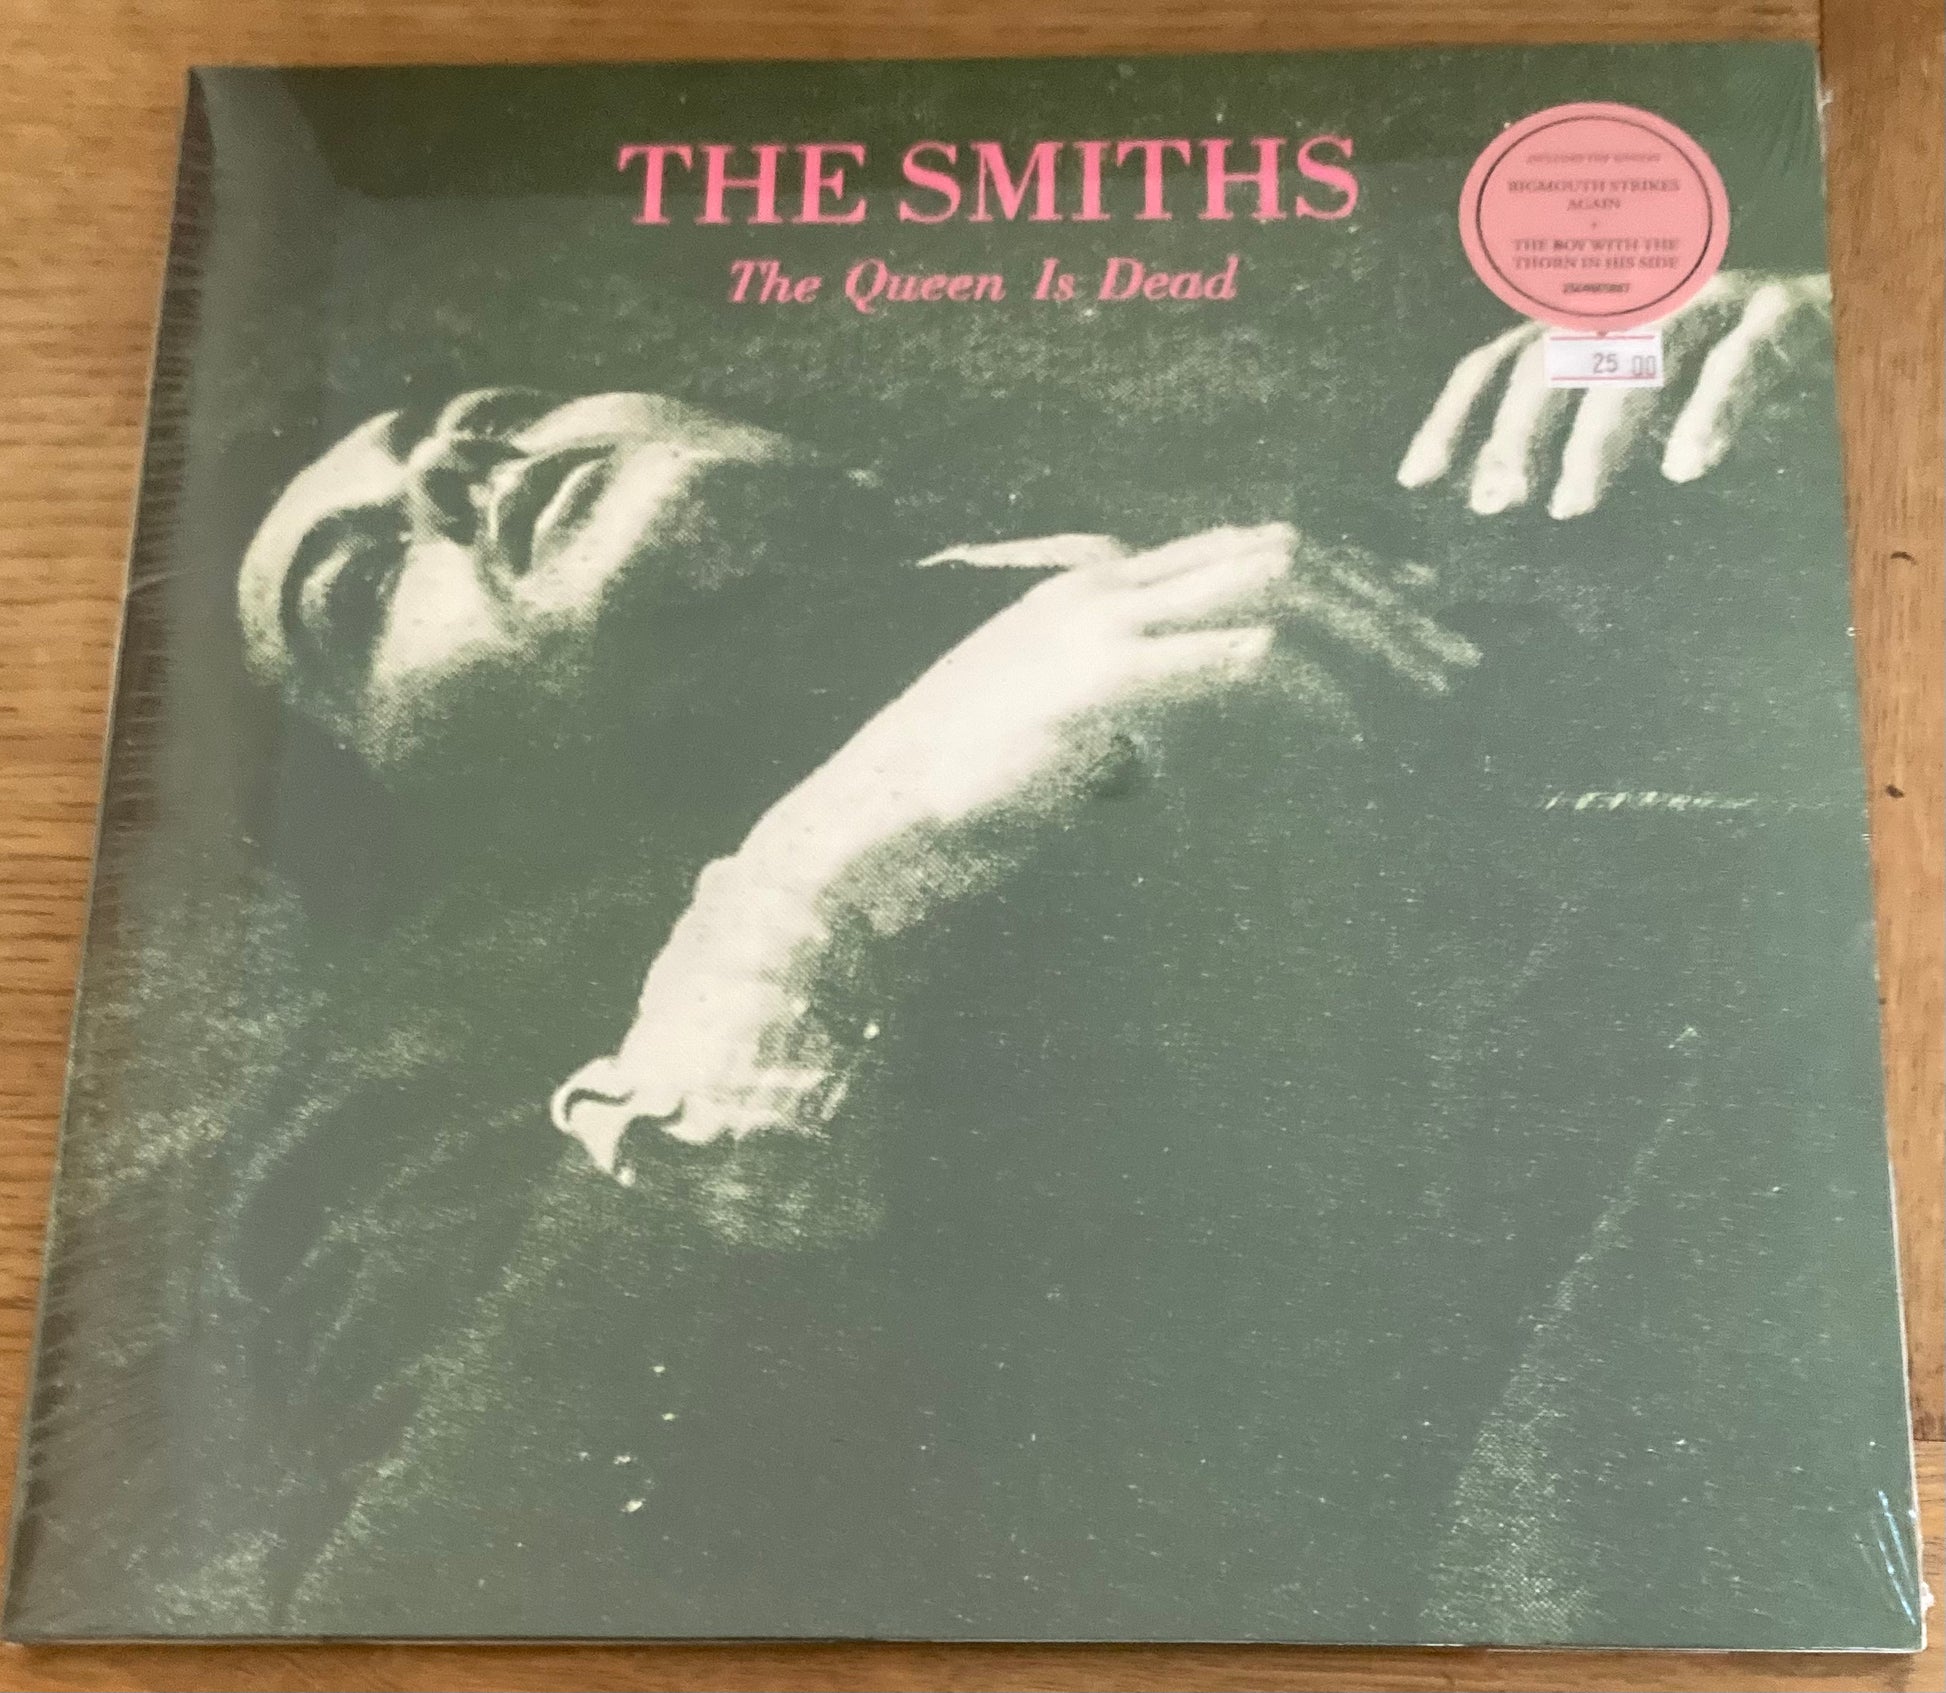 The front of 'The Smiths - The Queen is Dead' on vinyl